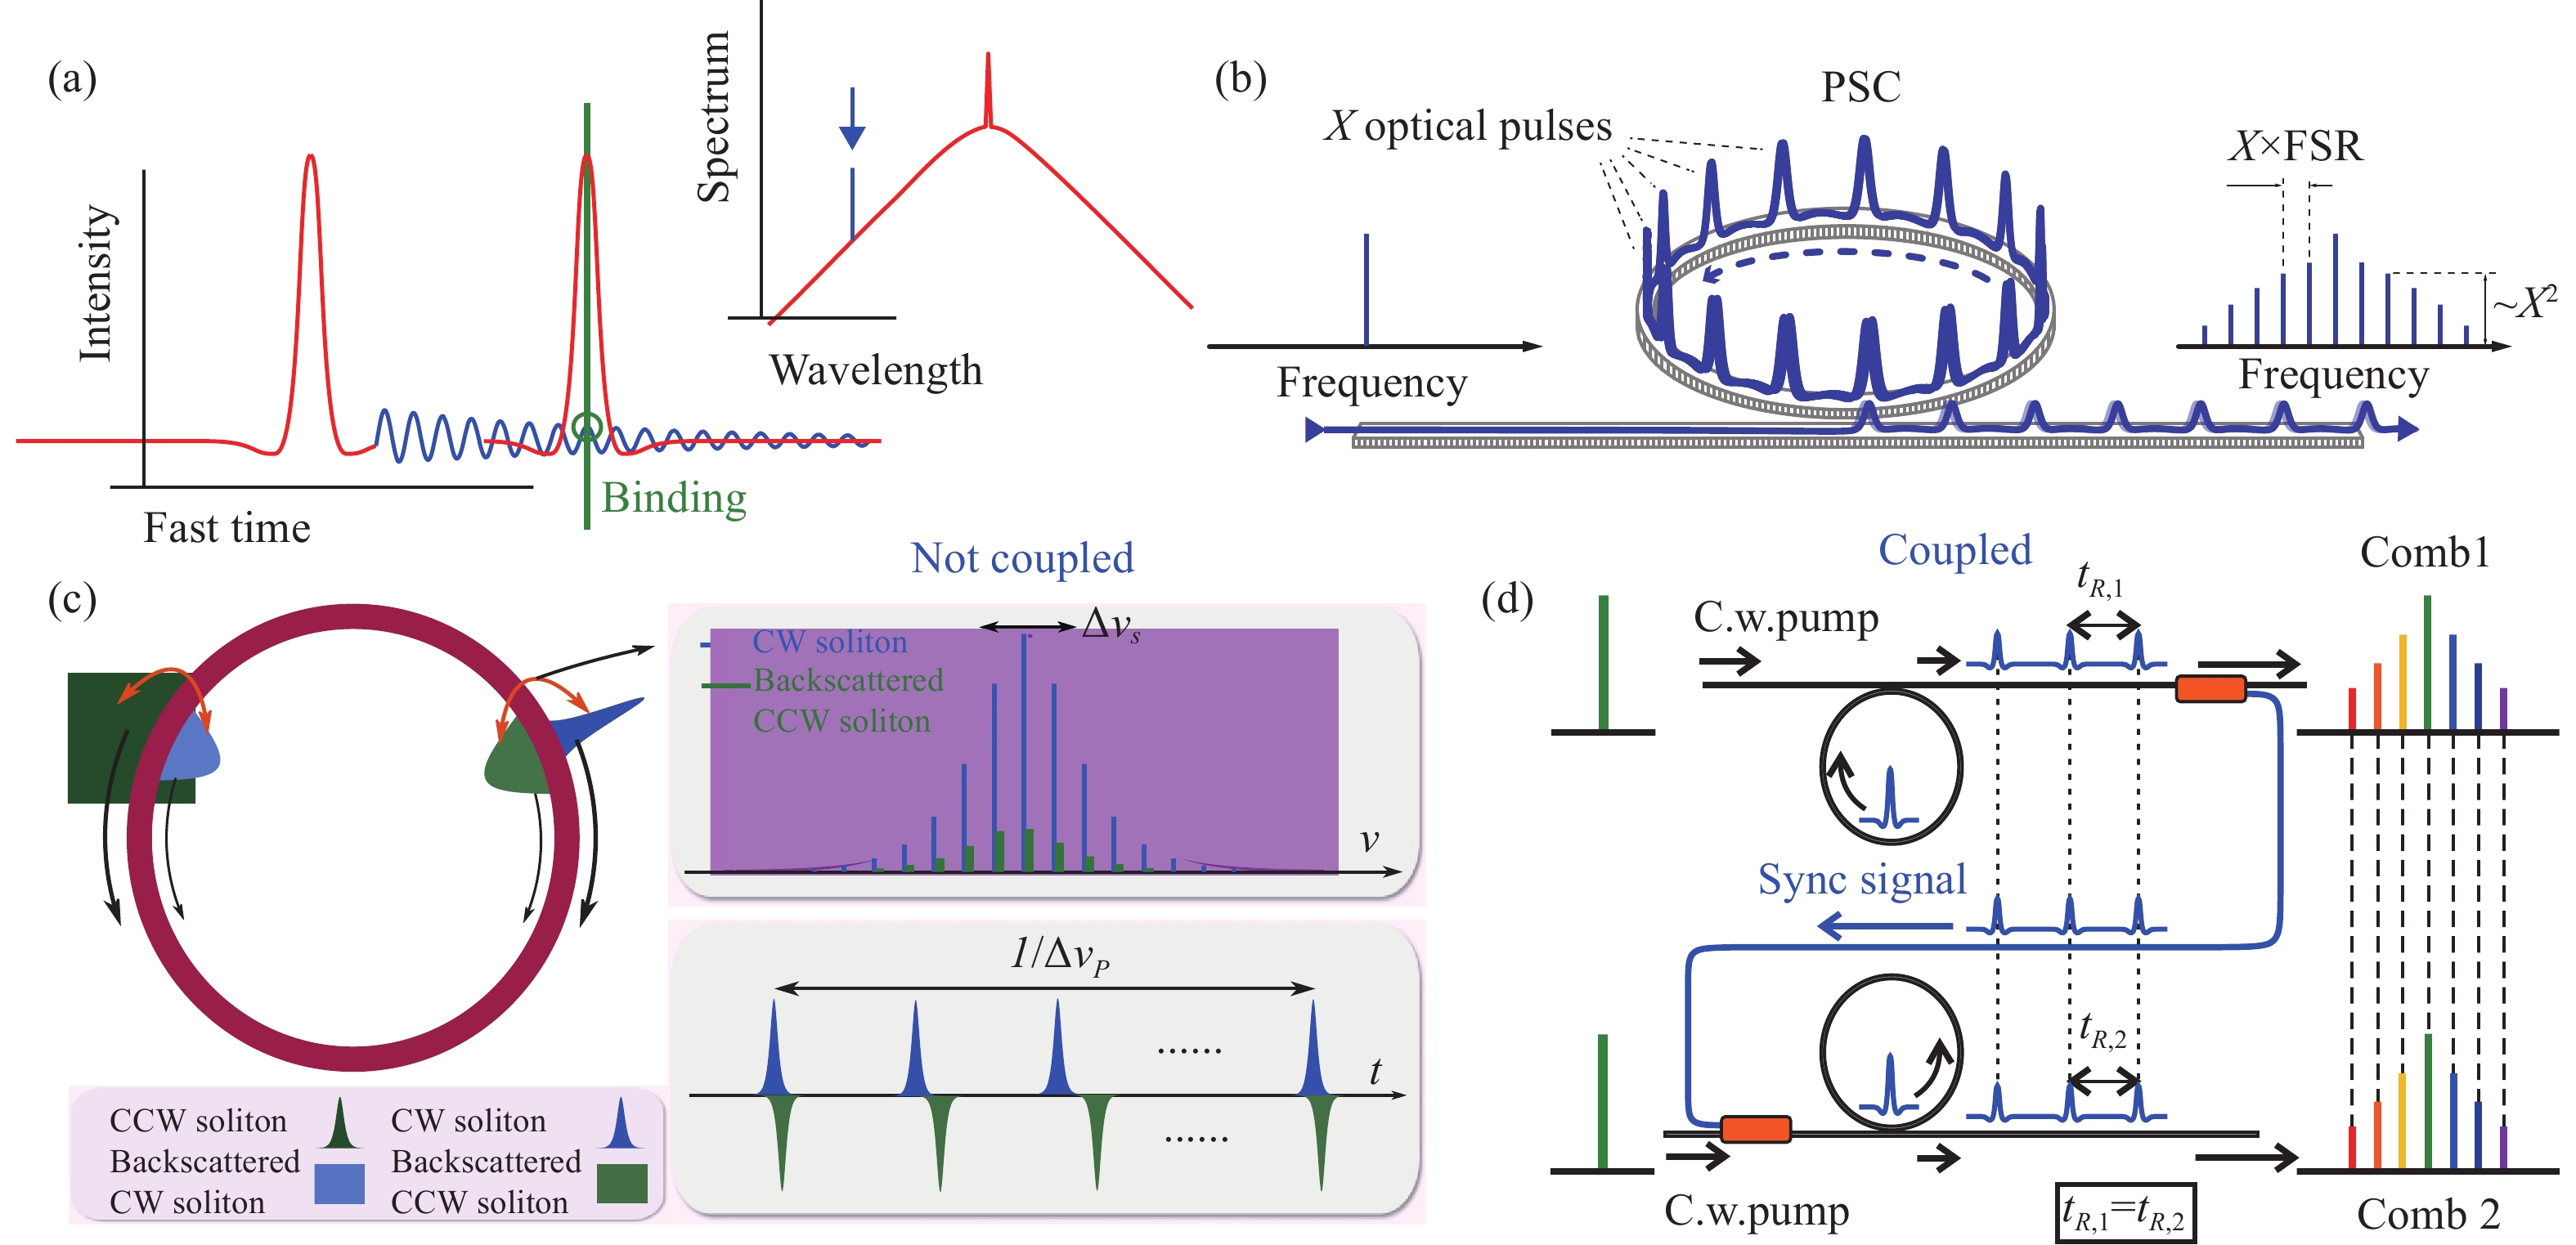 Soliton interaction in microcavities：(a) Illustration of co-propagating (CoP) solitons trapped by dispersive wave emission[79]; (b) Perfect soliton crystals (PSC) comprising X solitons in a microcavity[80]; (c) Counter-propagating (CP) solitons interaction via Rayleigh backscattering[82]; (d) Synchronization of solitons in two different microcavities via injecting one of the solitons into the other one[84]